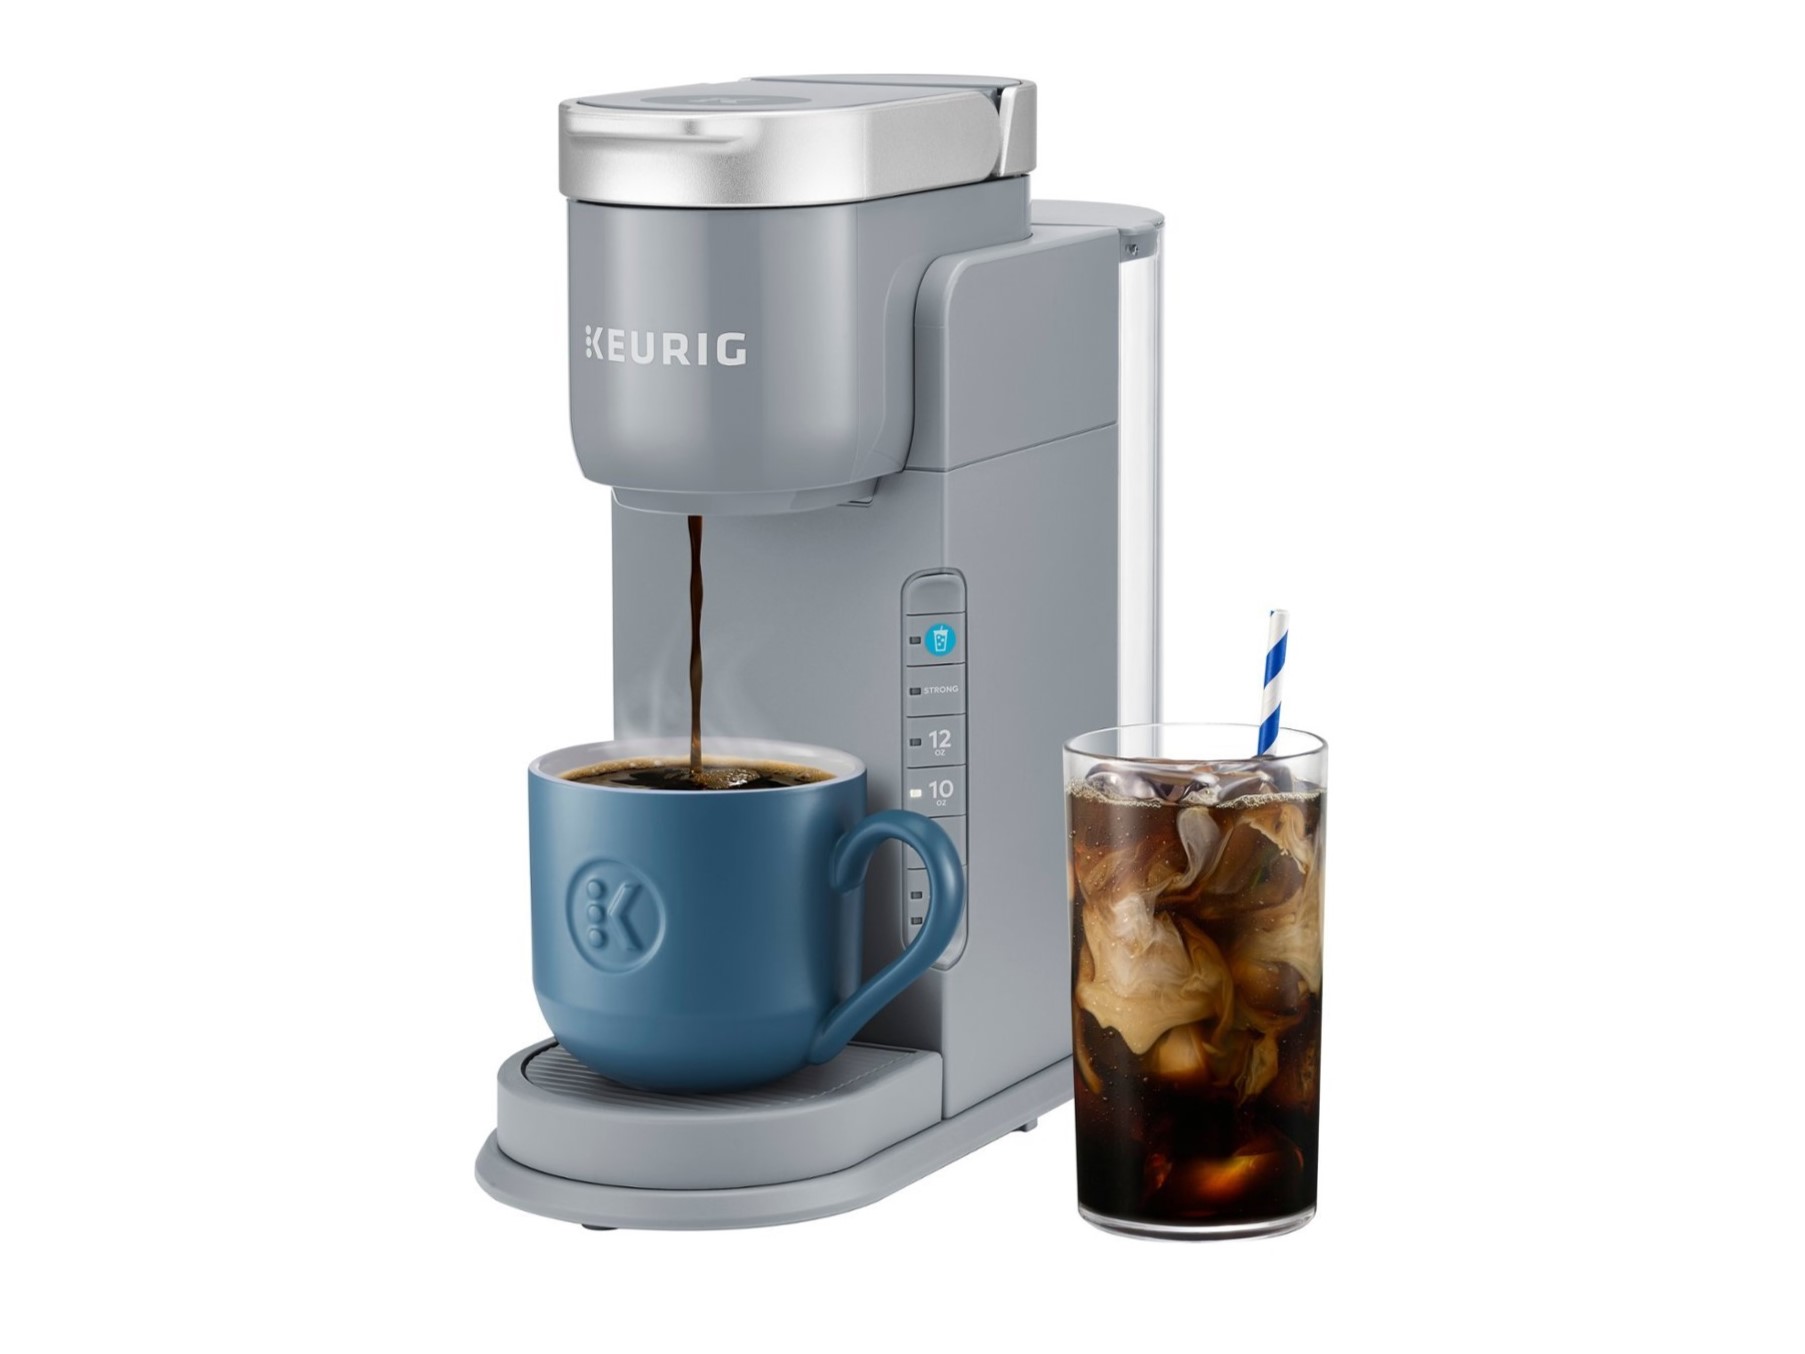 https://www.themanual.com/wp-content/uploads/sites/9/2023/08/Keurig-K-Iced-coffee-maker-with-hot-and-cold-coffee.jpg?fit=800%2C599&p=1